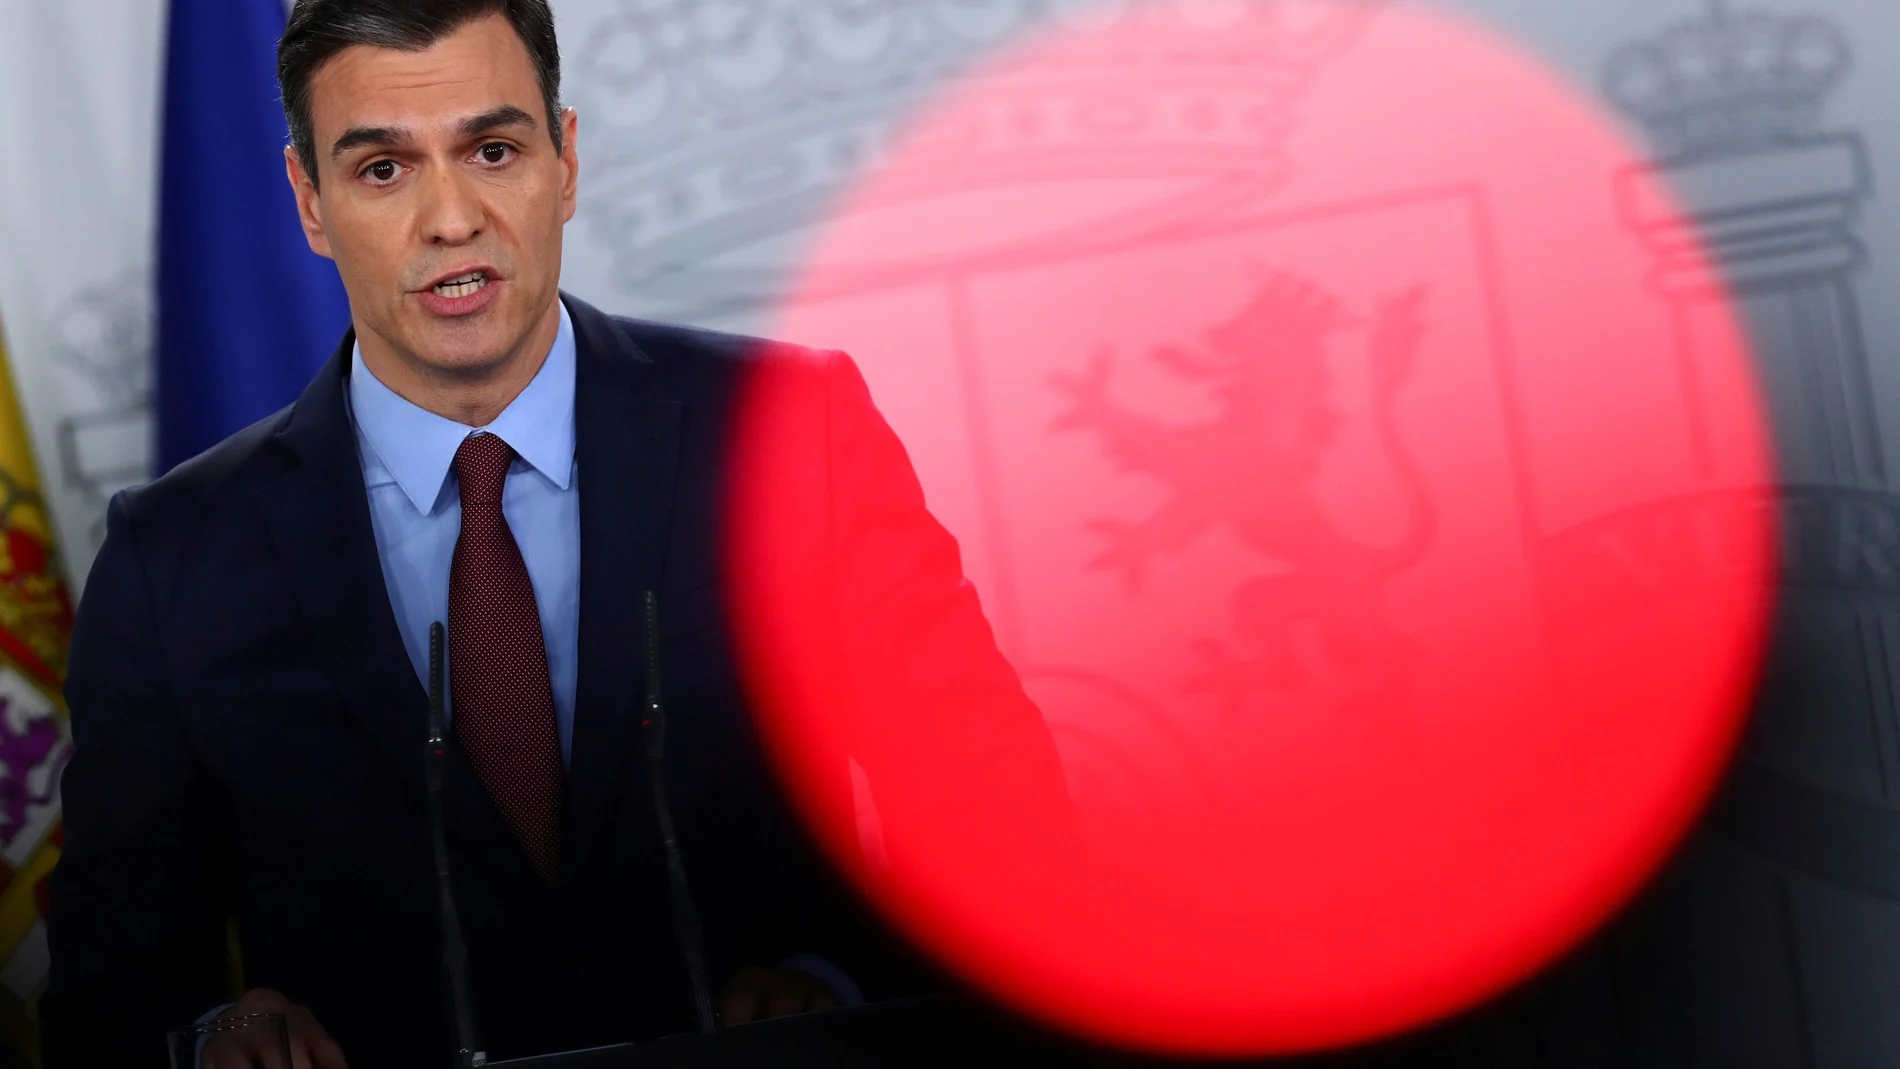 FILE PHOTO: Spanish Prime Minister Pedro Sanchez speaks during a news conference after taking part in a conference call with European leaders at the Moncloa Palace in Madrid, Spain March 10, 2020. REUTERS/Sergio Perez/File Photo